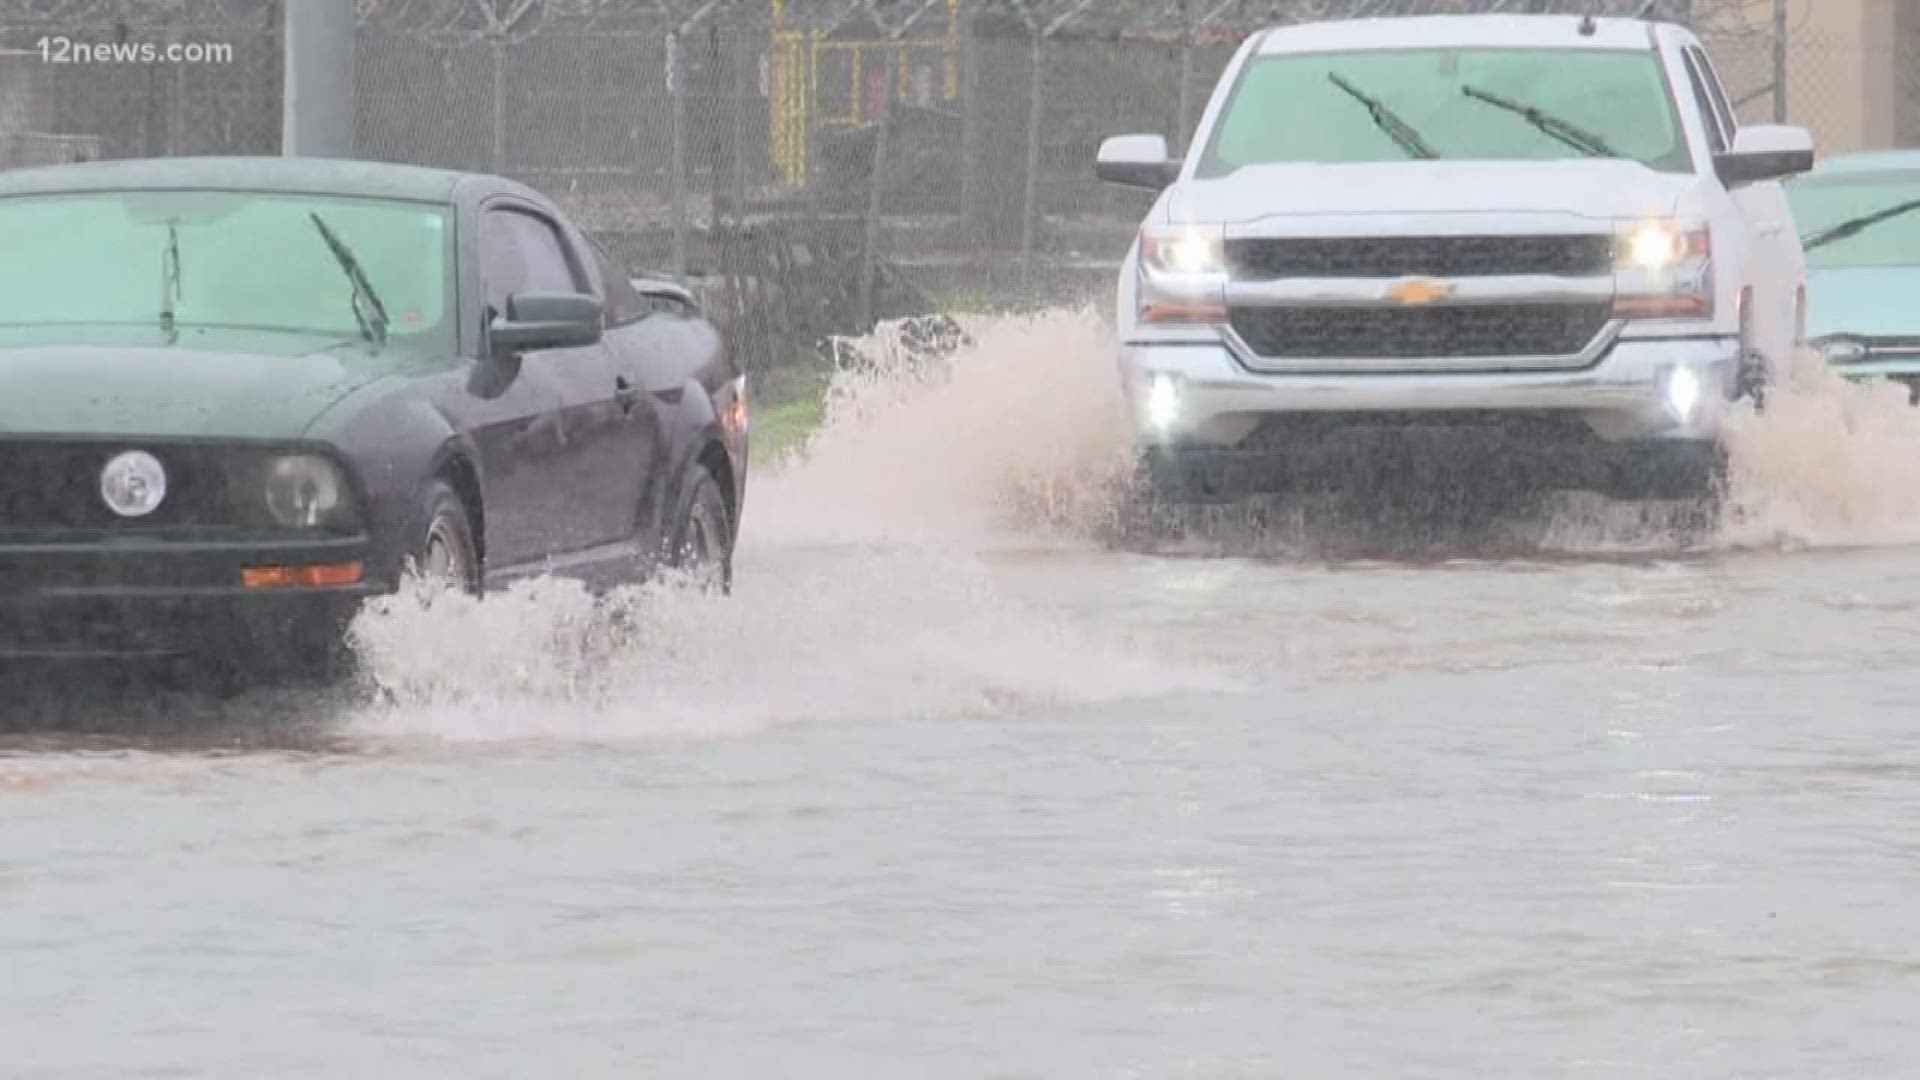 It rained more than two inches on Saturday according to the NWS.